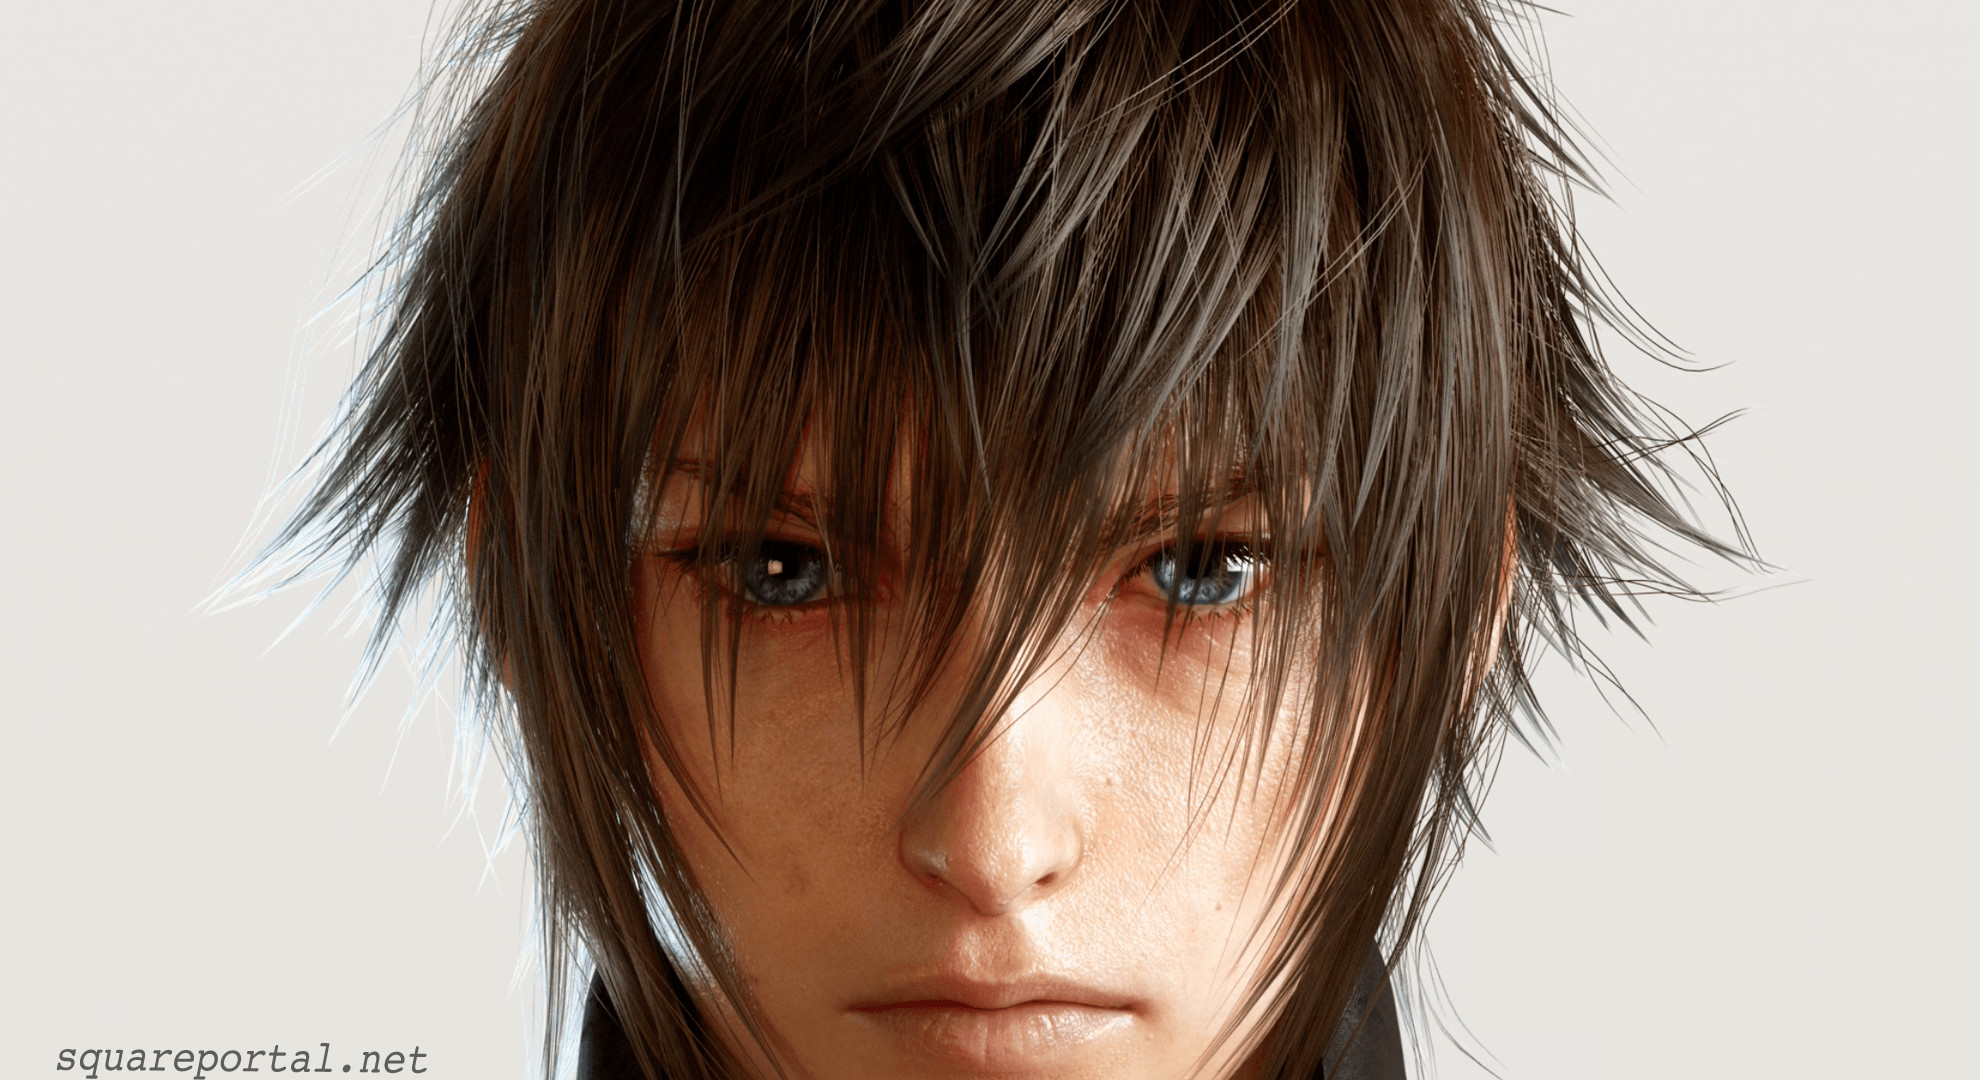 1980x1080 89 Final Fantasy XV HD Wallpapers | Backgrounds - Wallpaper Abyss